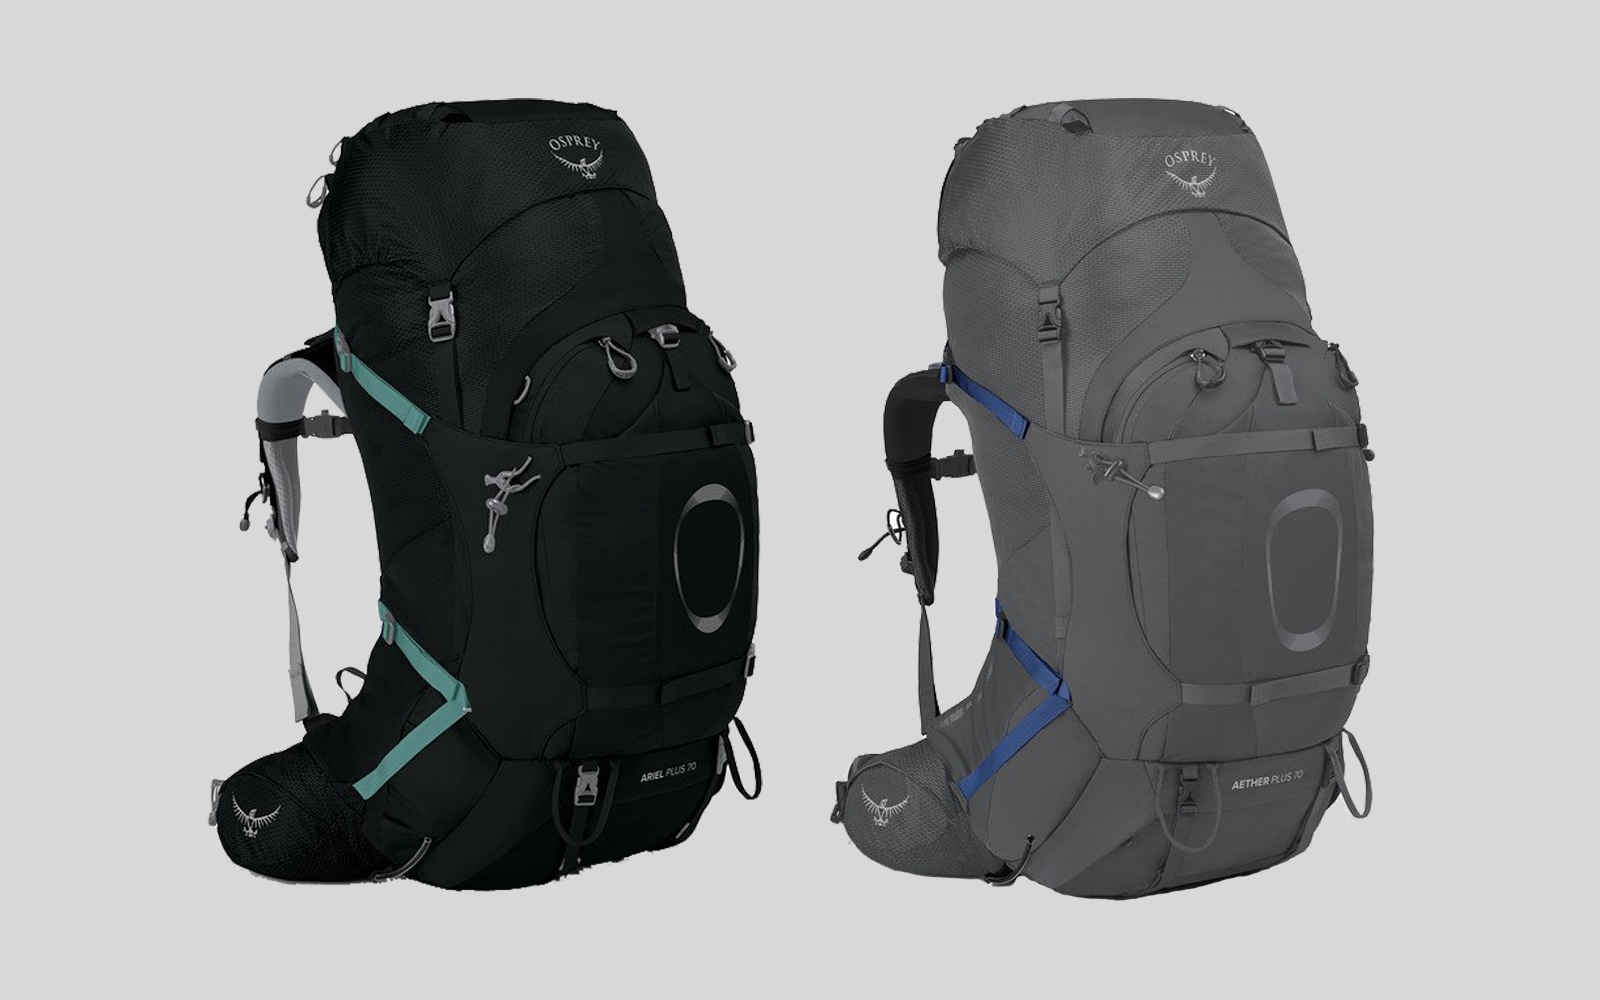 Backpacking gear